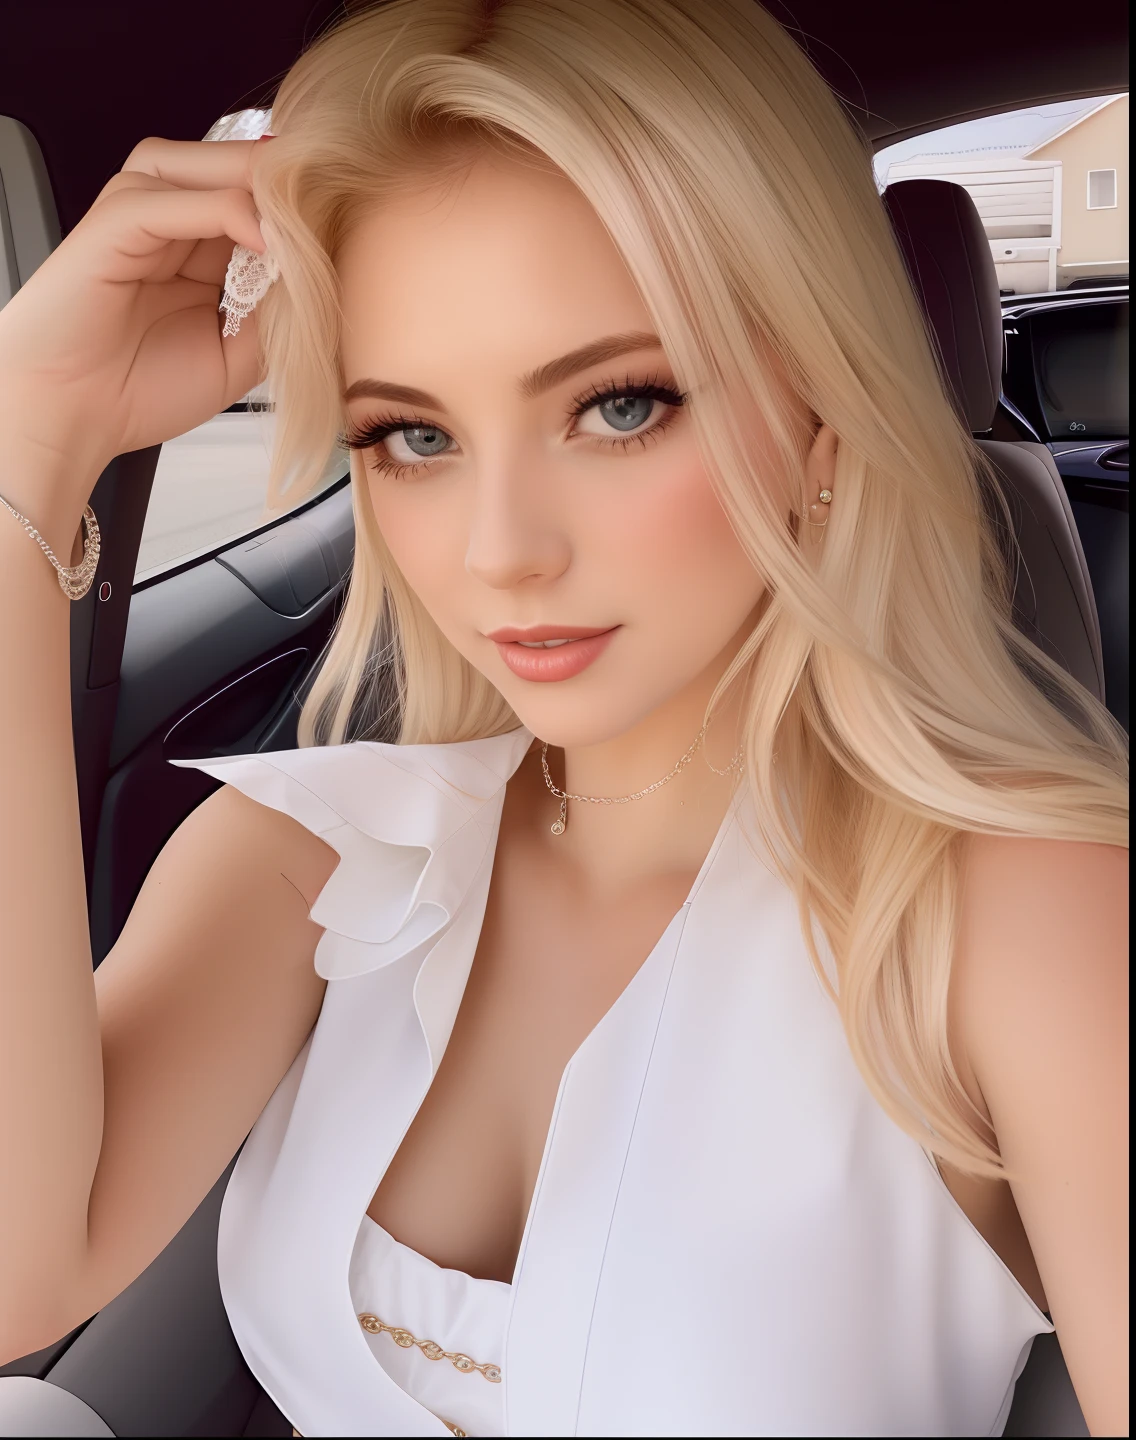 Blonde woman in white dress sitting in car with her hand on her head,  seductiv, breasts big,  fleshy lips, undress, new, delicious, surrealistic, prettify, 8K, futuristic